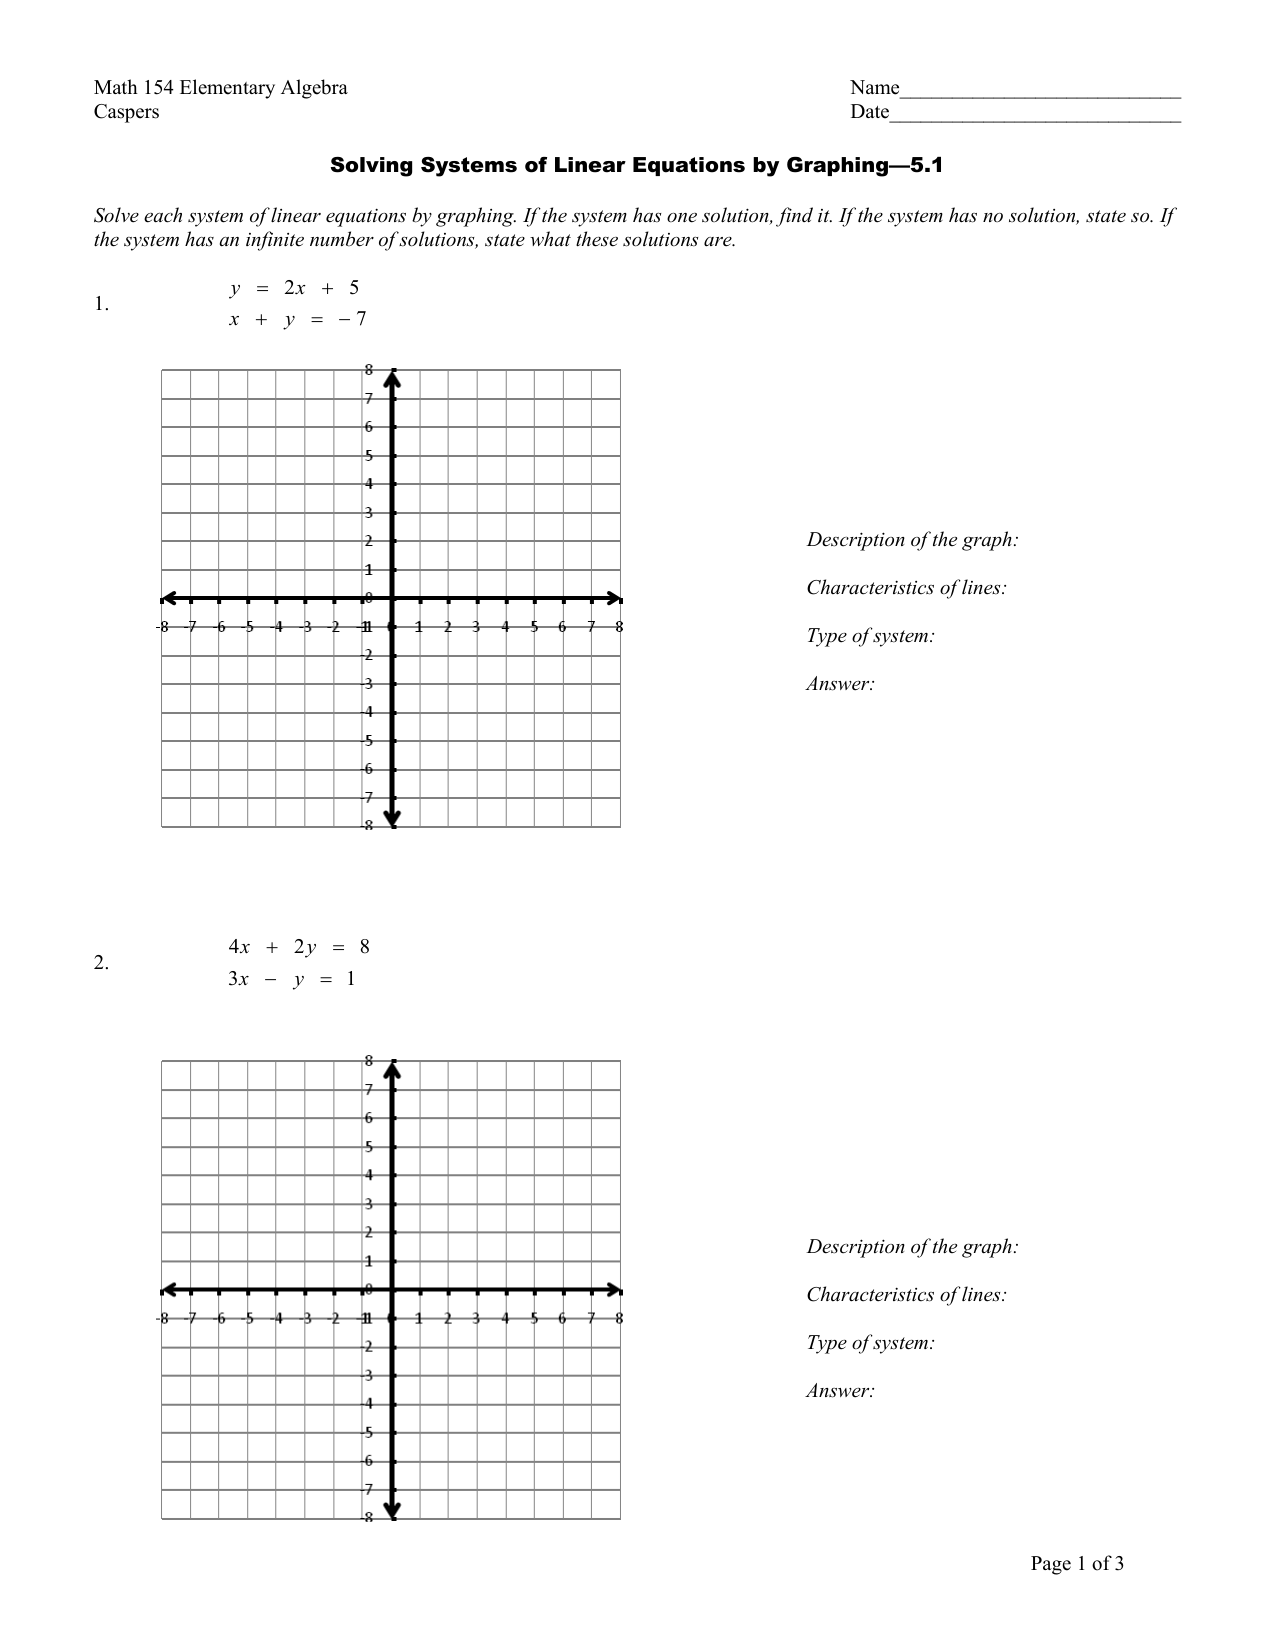 Solving Systems of Linear Equations by Graphing Worksheet Regarding Graphing Linear Equations Worksheet